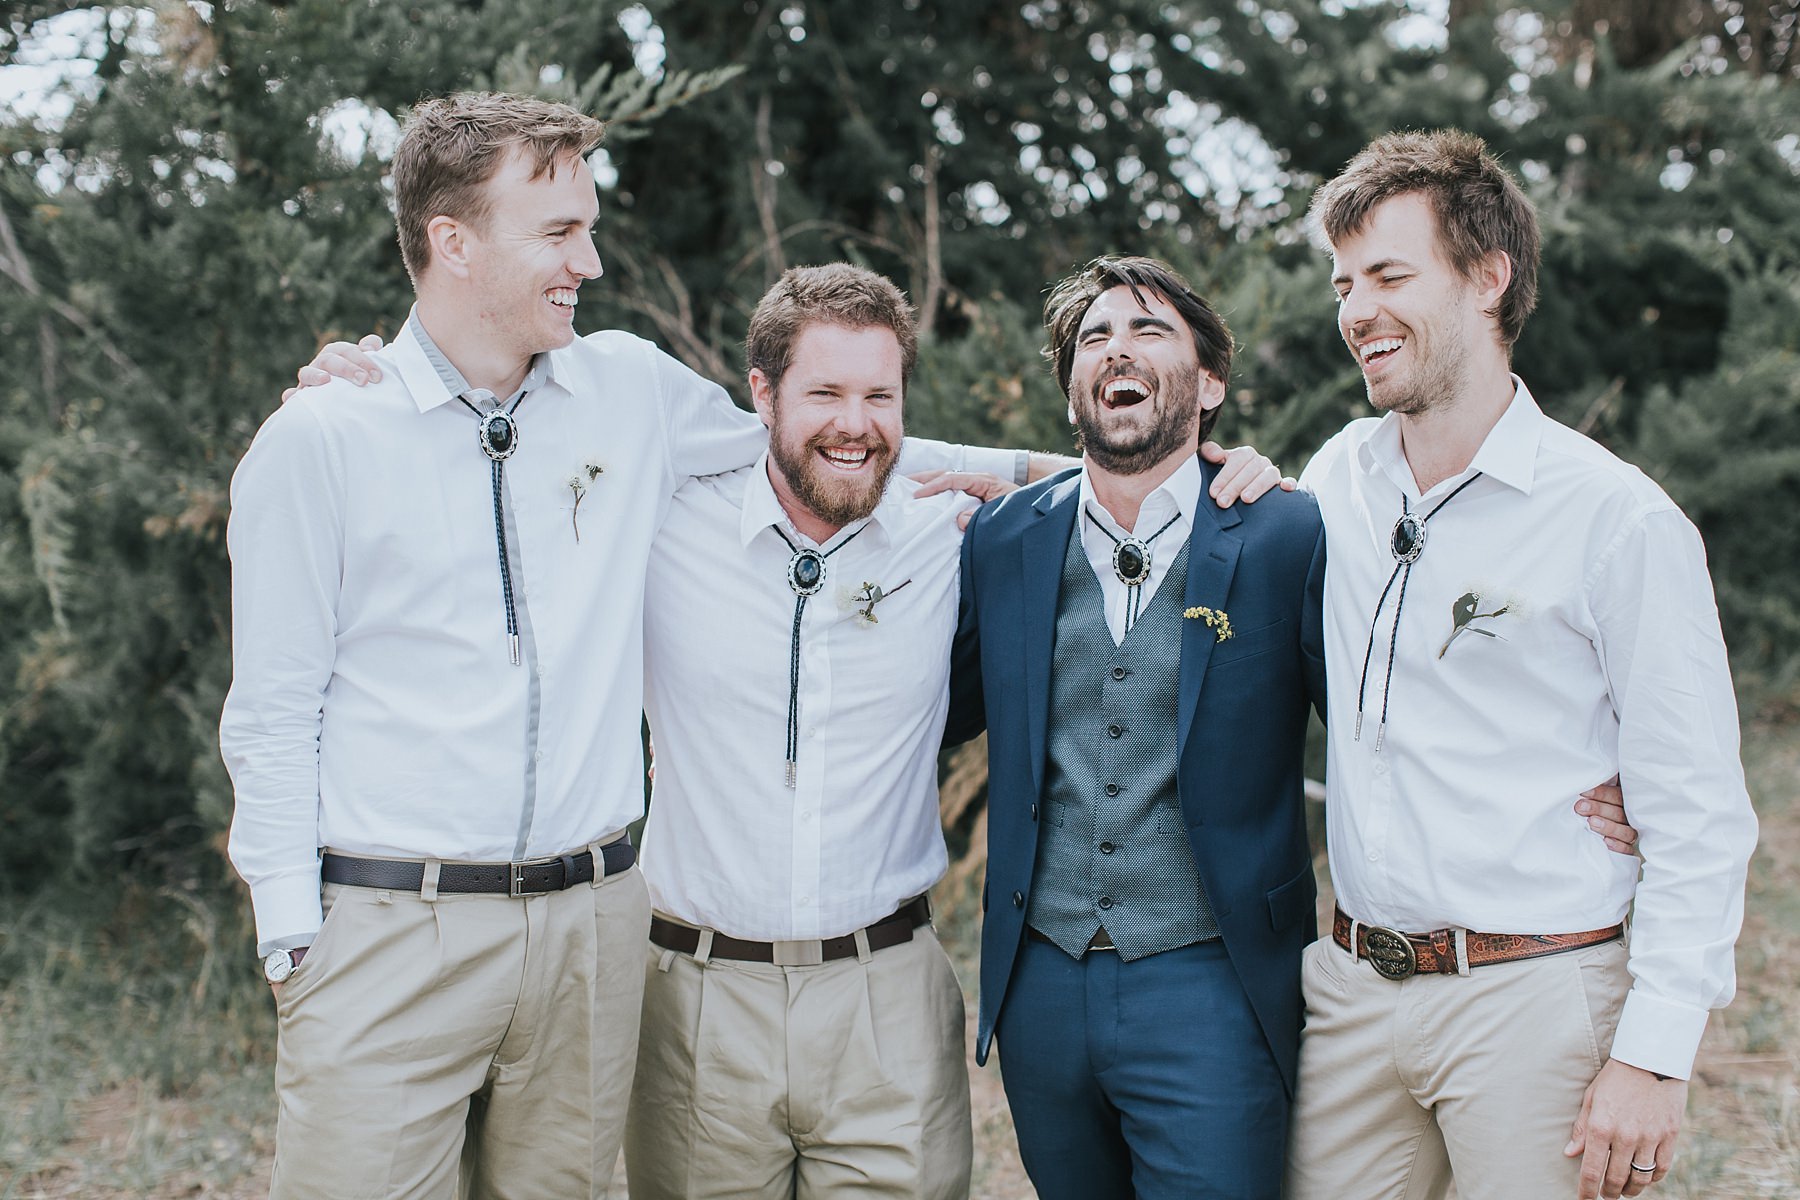 lots of laughter with groomsmen